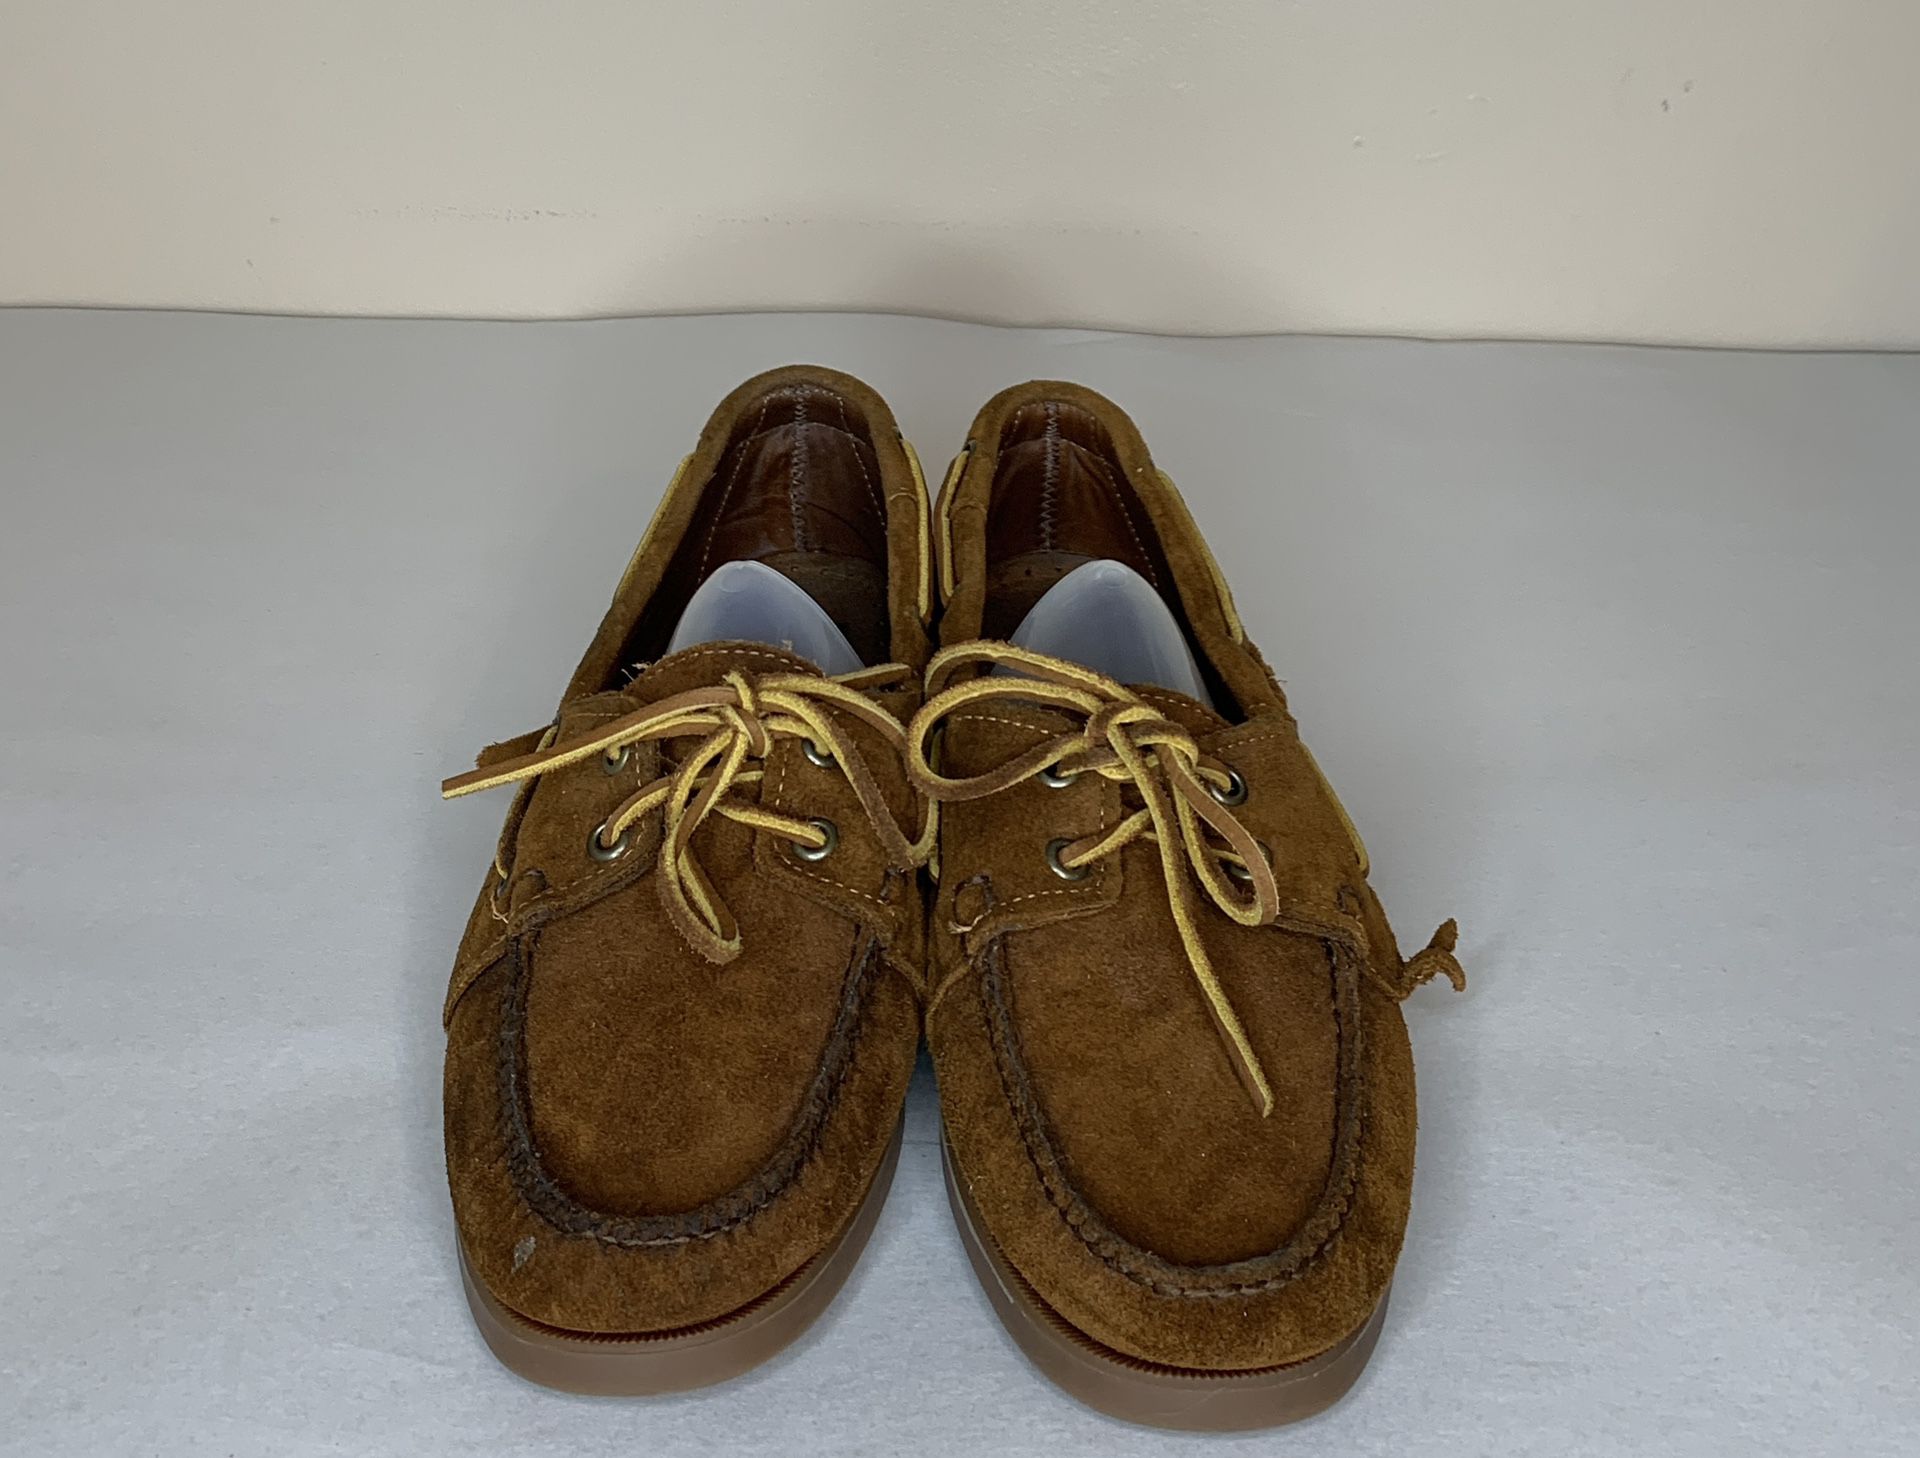 Ronnie Fieg x Sebago Docksides Loafers Moccasins Driving Shoes Men’s Size 10 New without original box